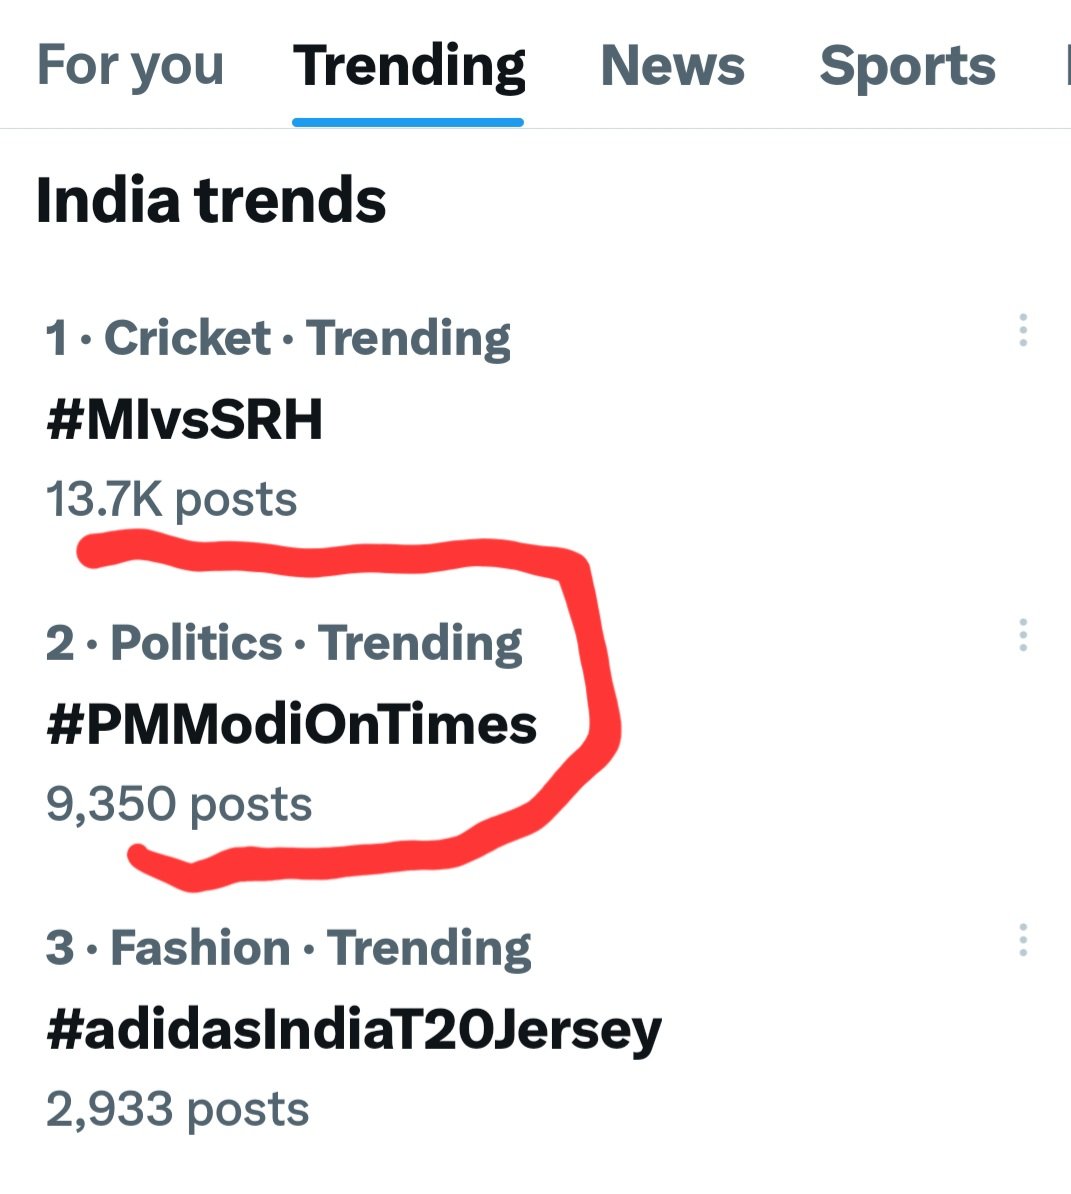 So #PMModiOnTimes is Trending on Twitter 🙂